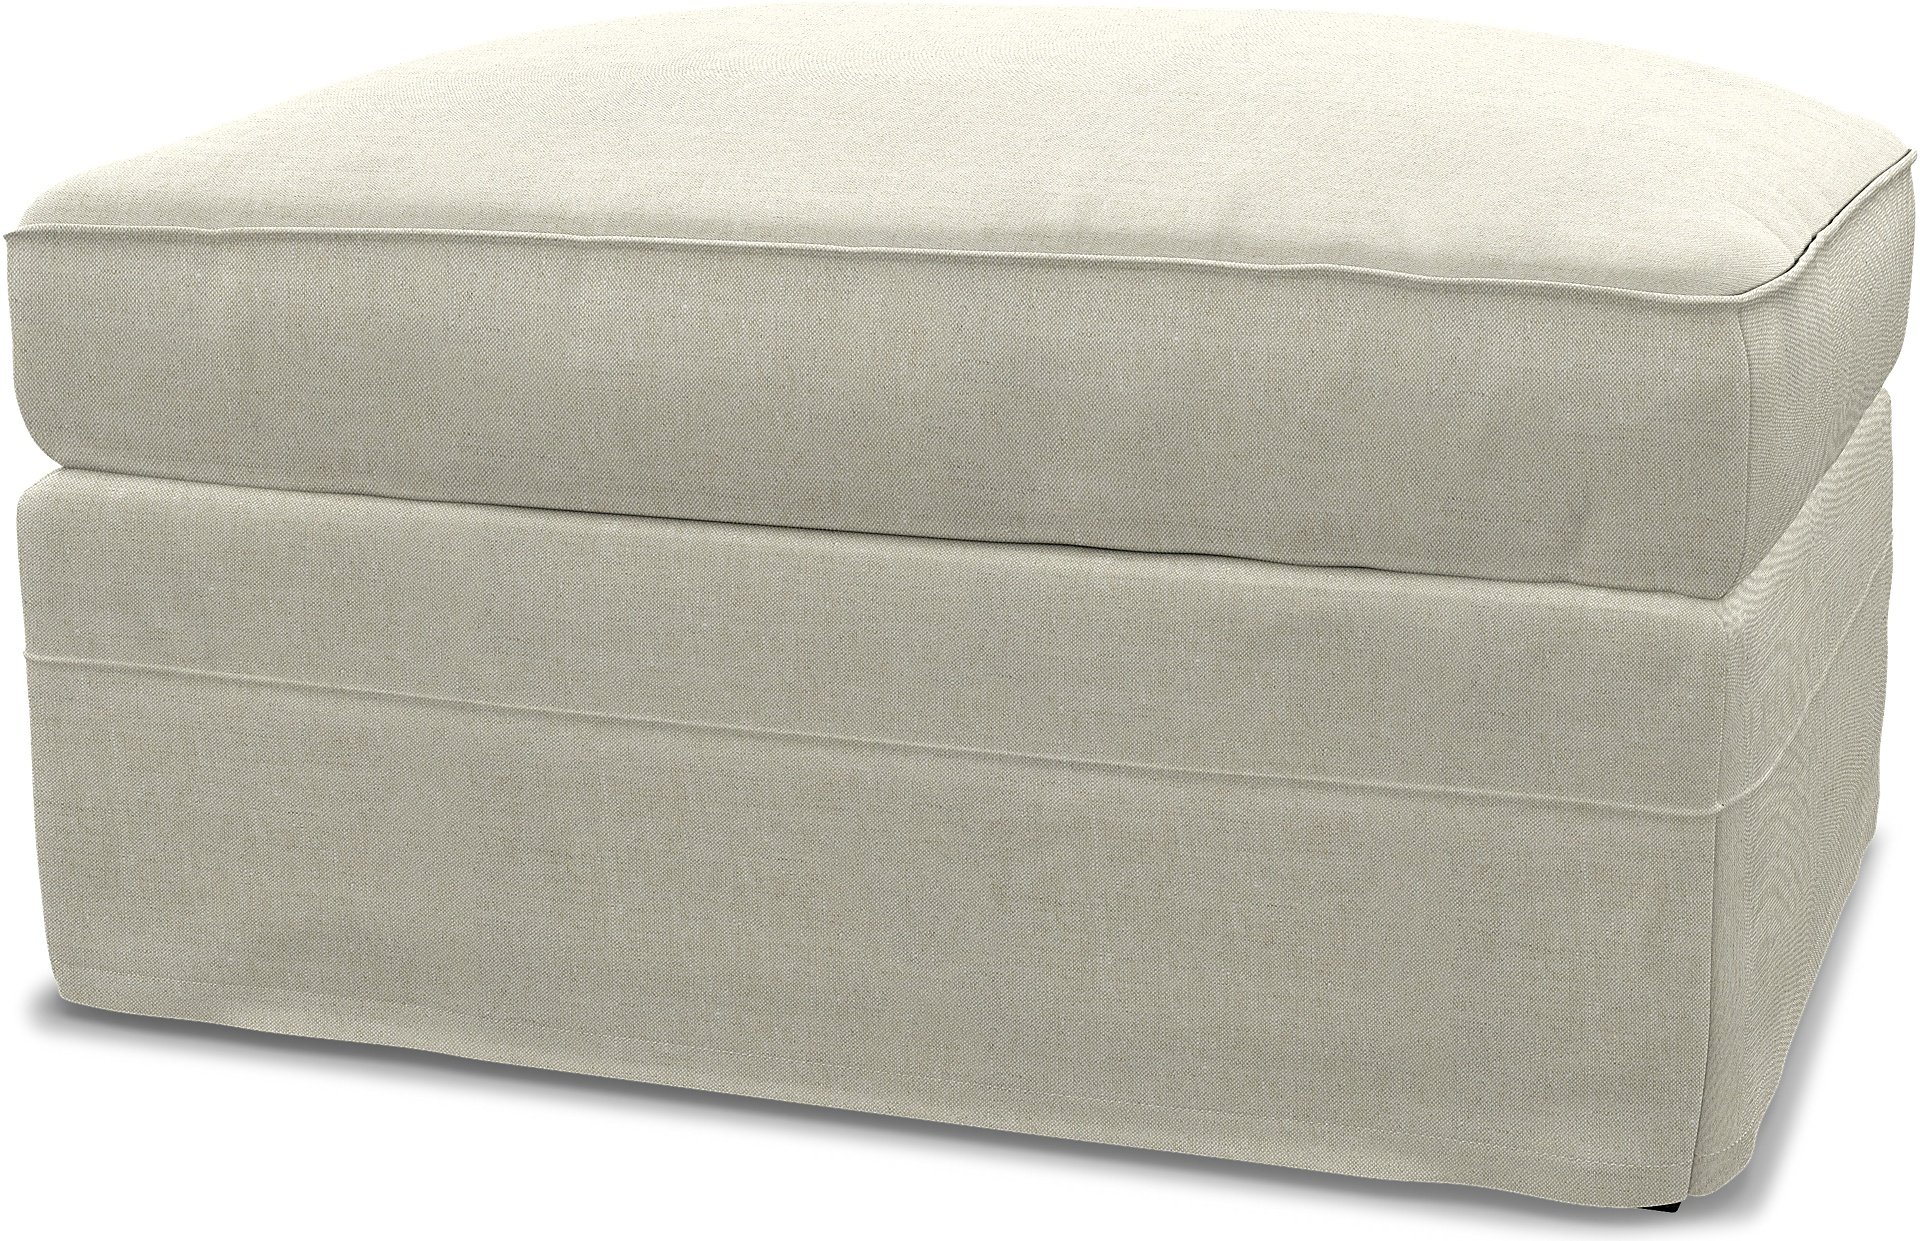 IKEA - Gronlid Footstool with Storage Cover, Natural, Linen - Bemz